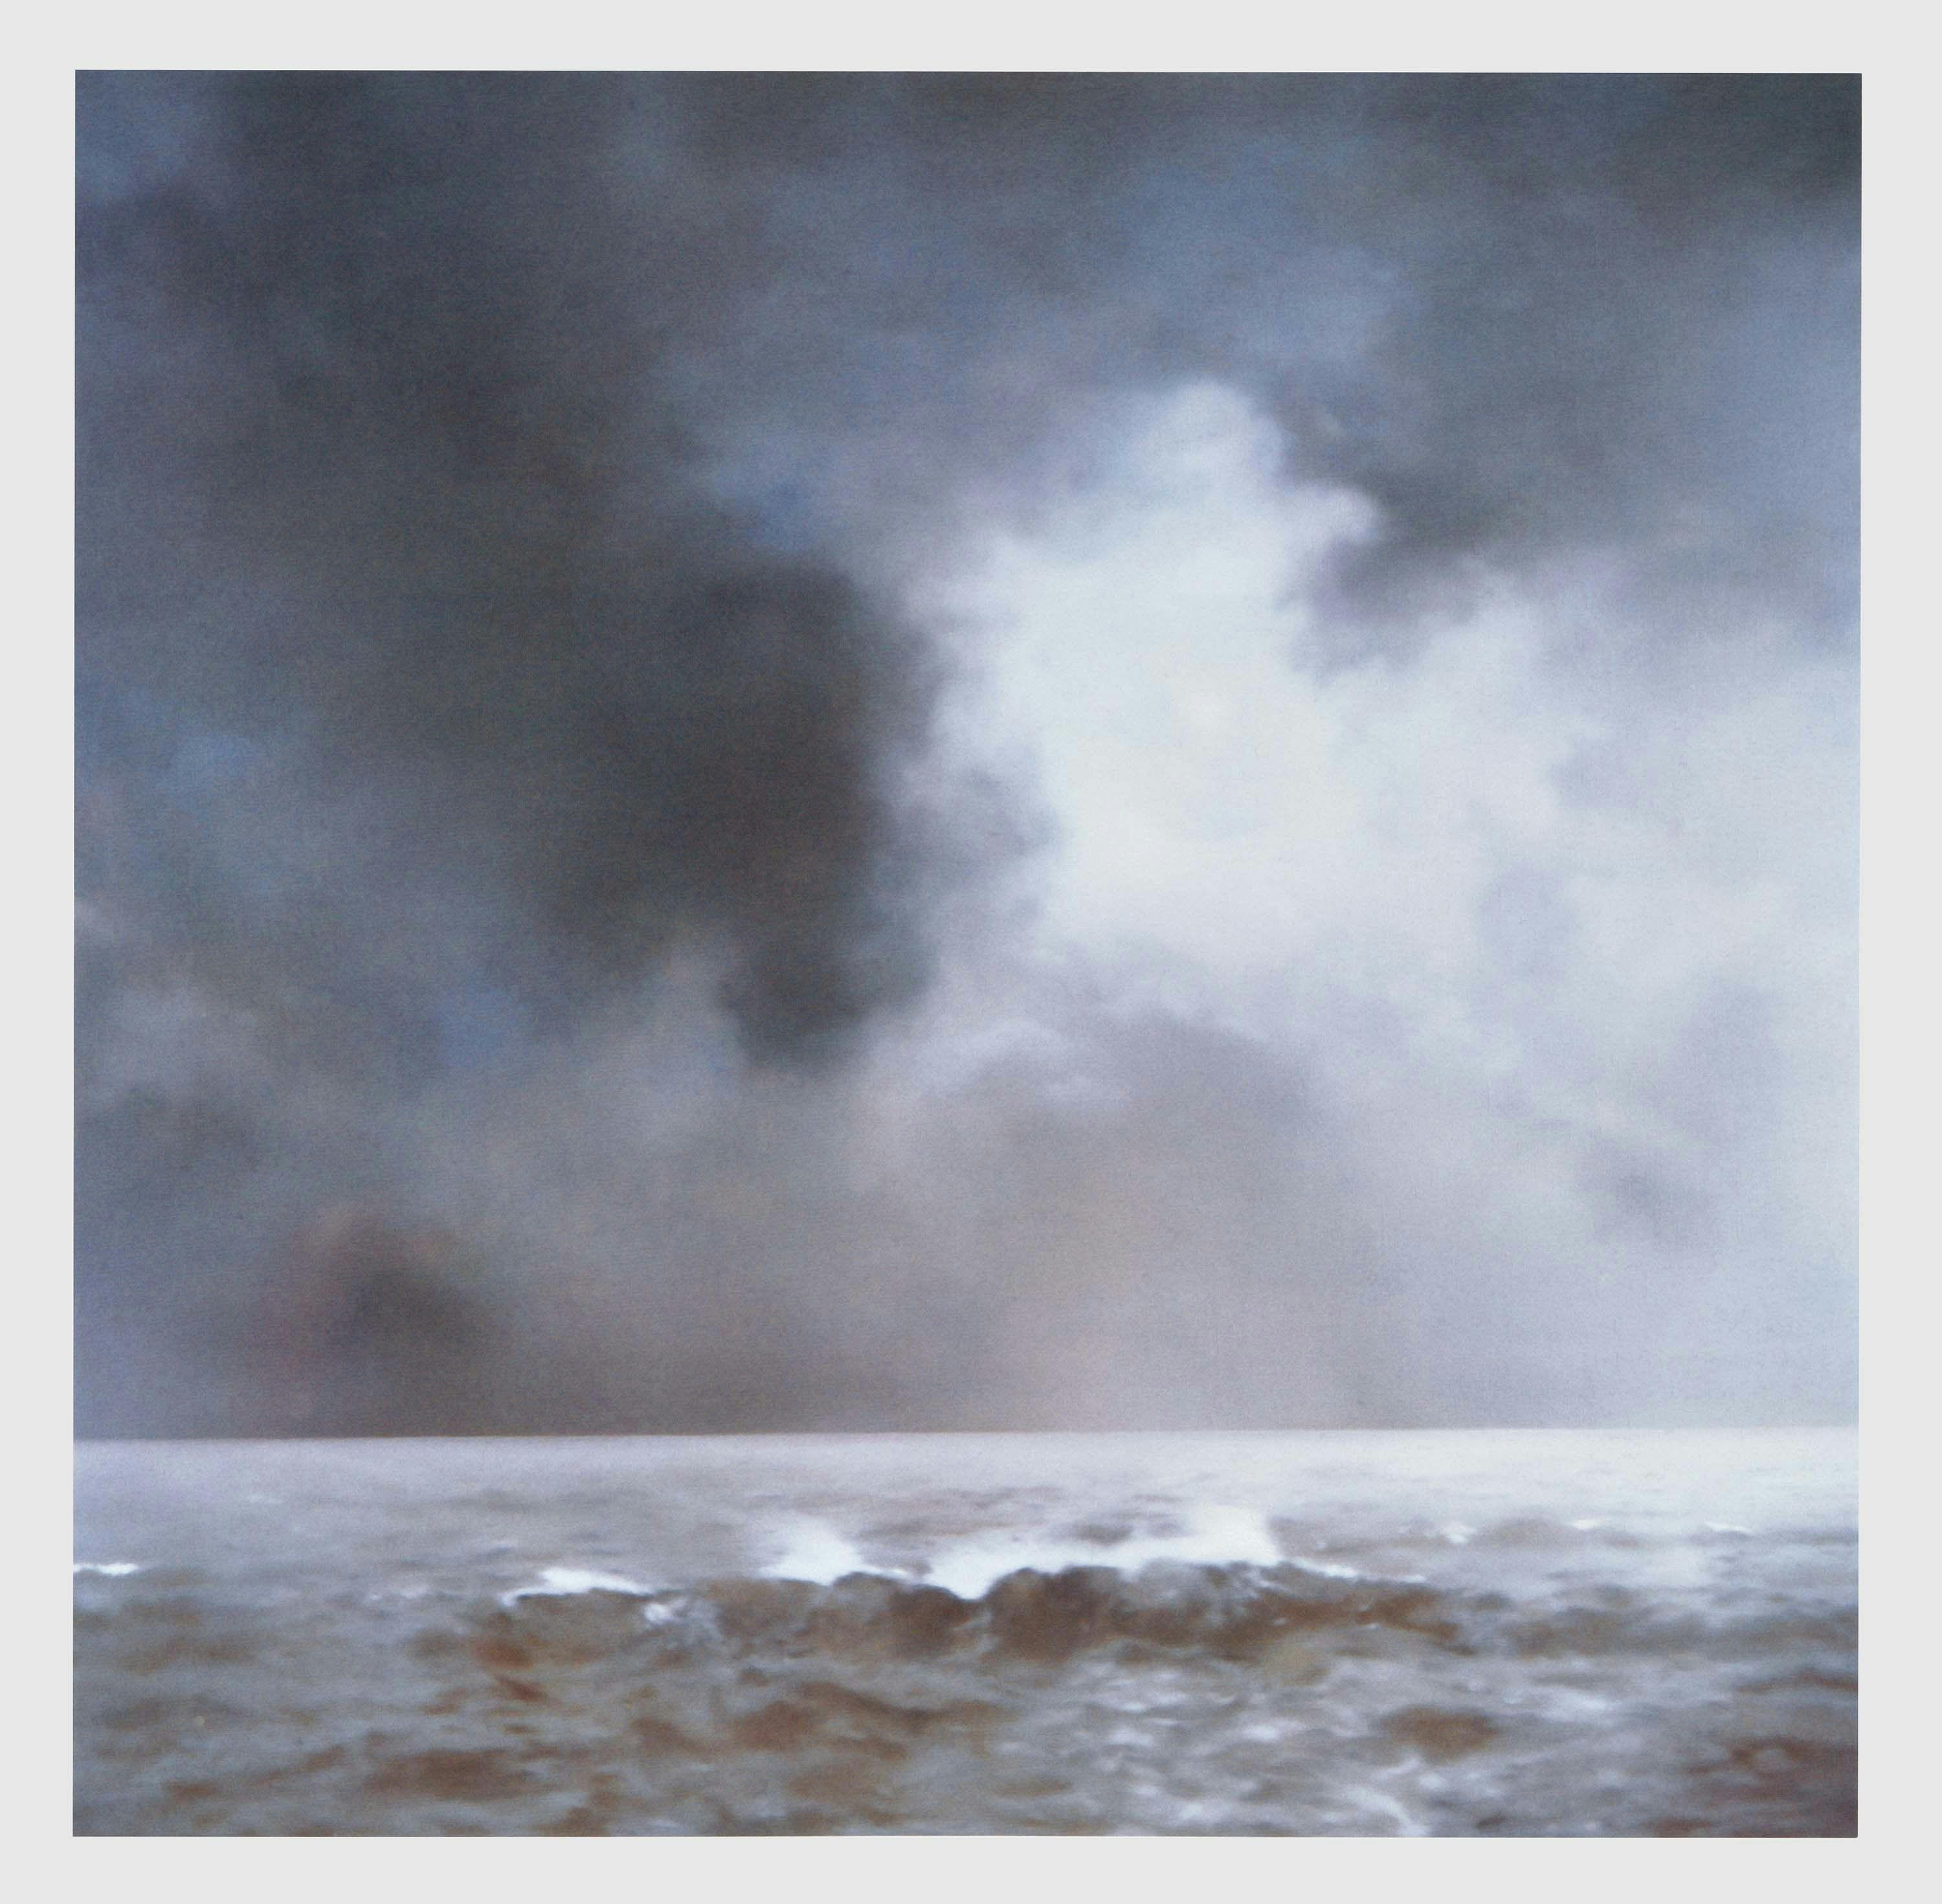 A painting by Gerhard Richter, titled Seestück (Welle) (Seascape [Wave]), dated 1969.